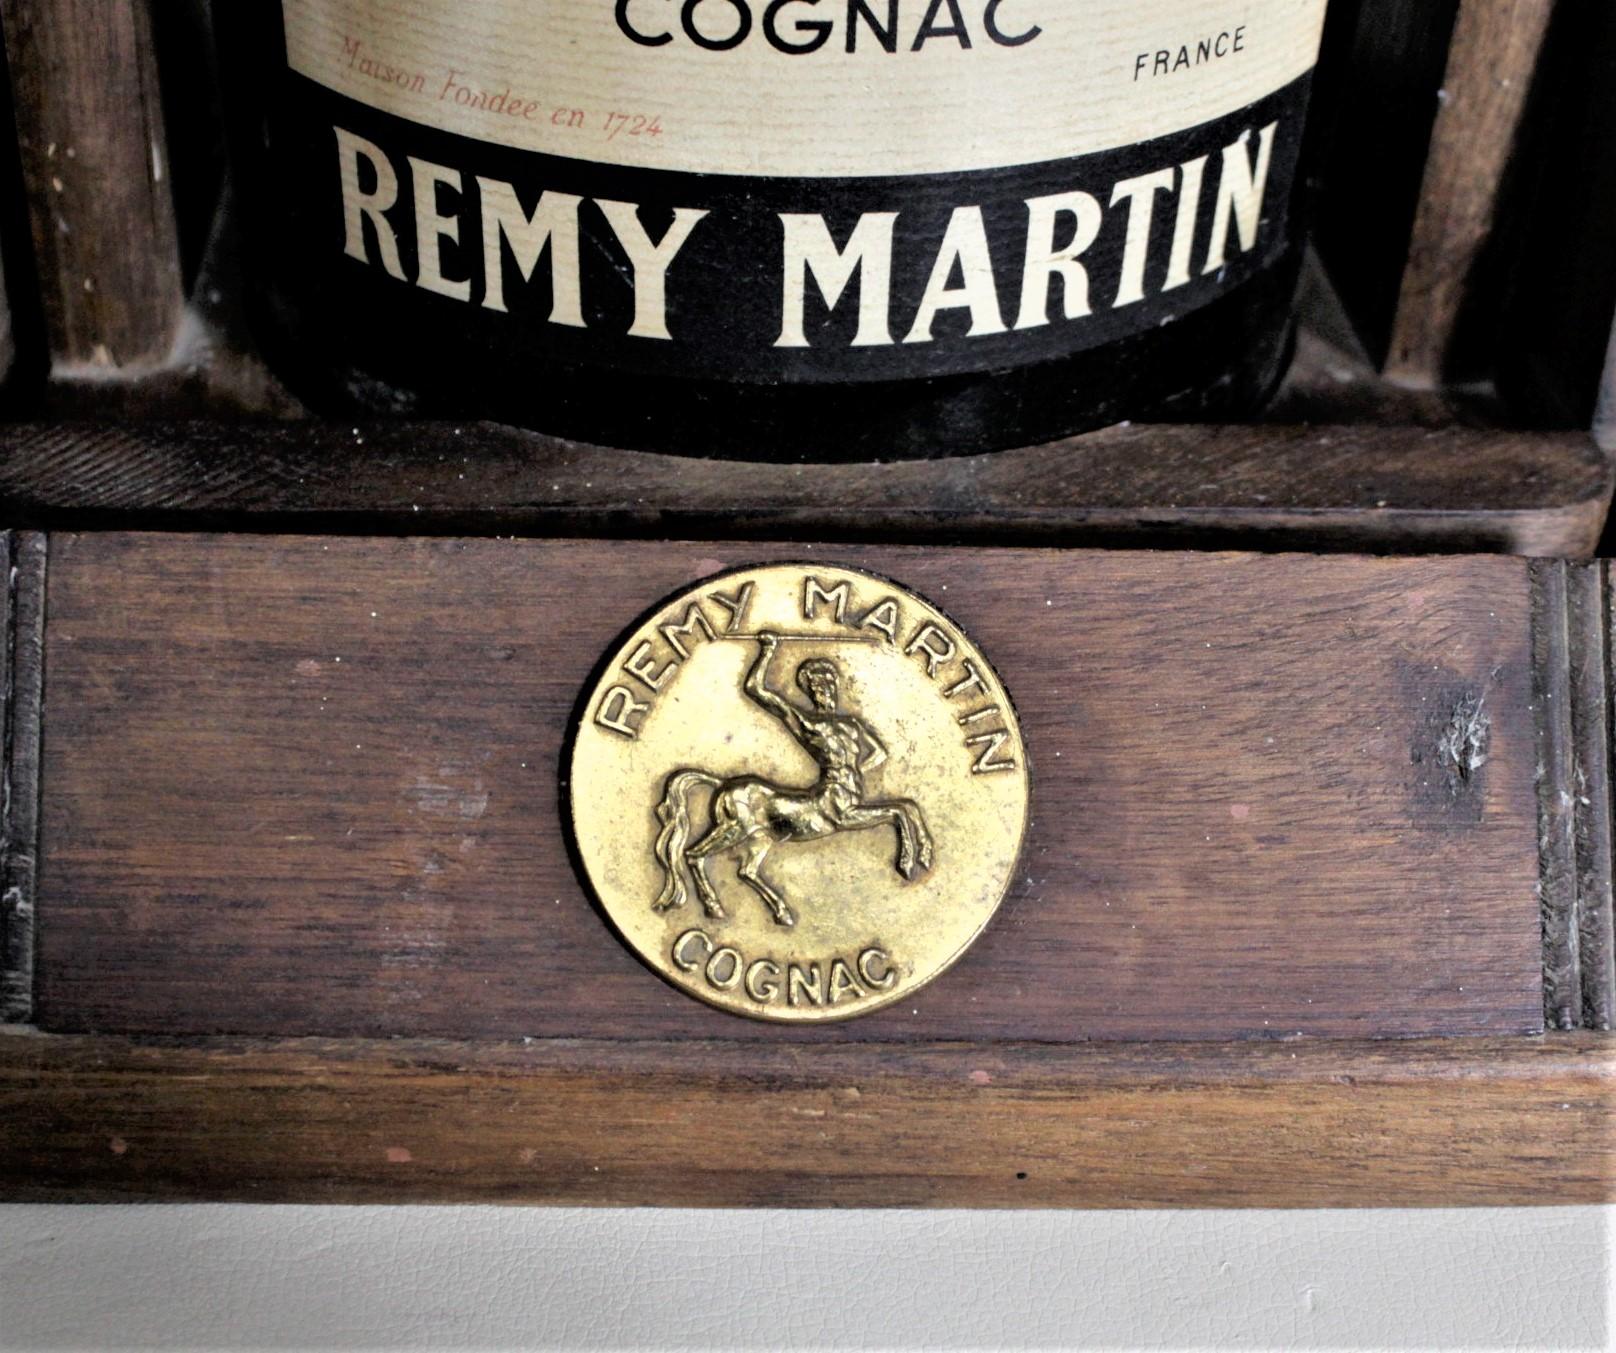 Large Mid-Century Remy Martin Wooden Bottle Tipper Cognac Display Dispenser In Good Condition For Sale In Hamilton, Ontario